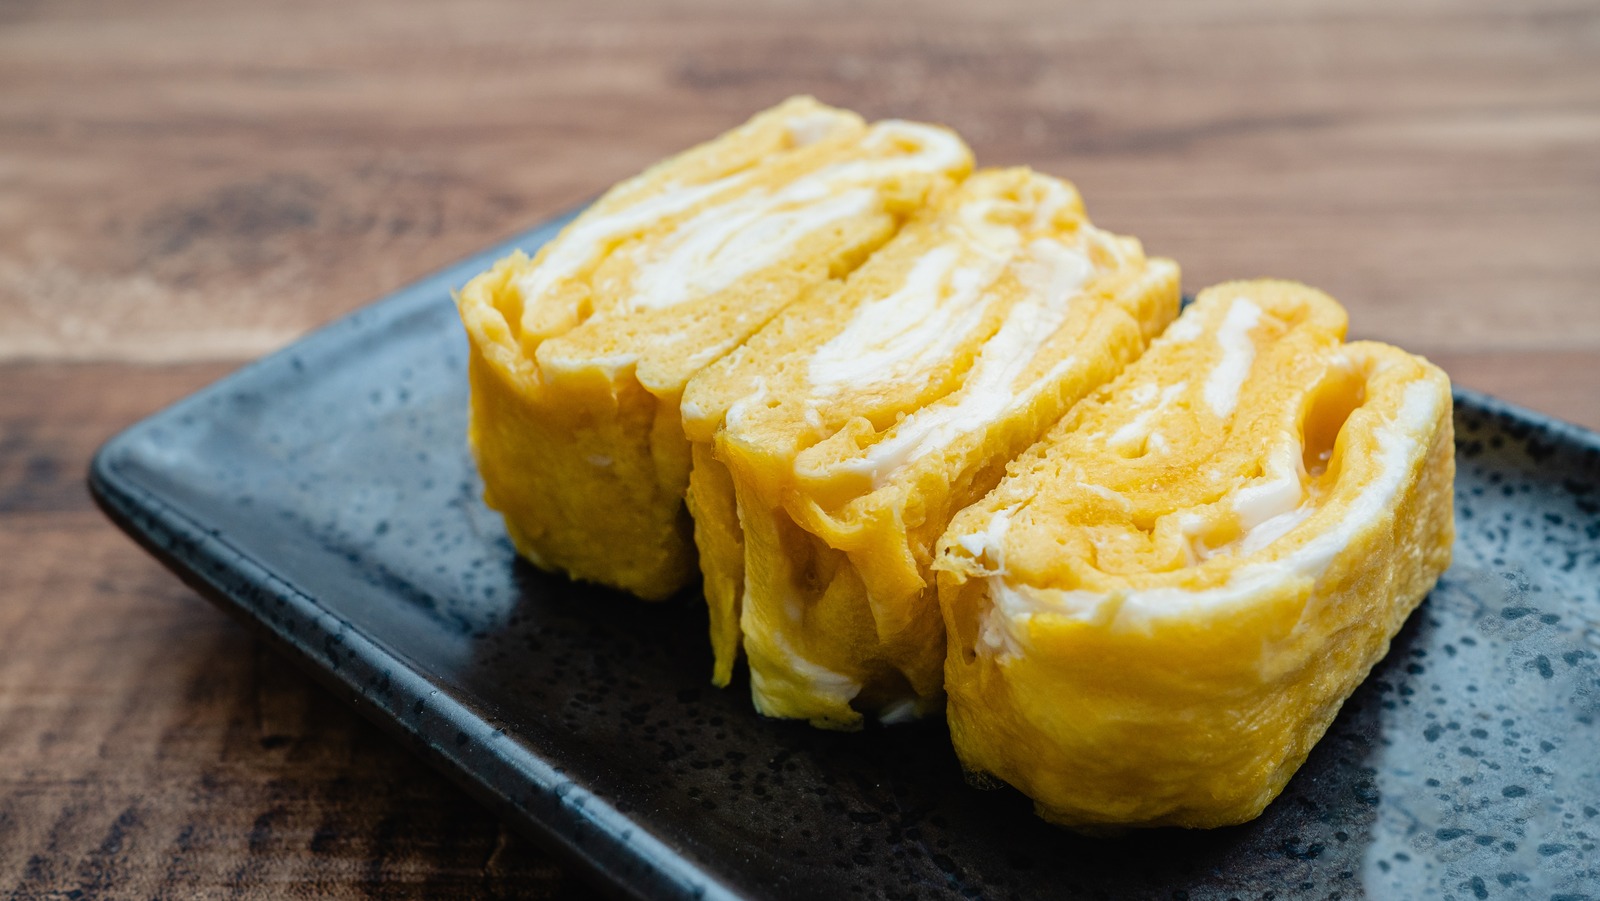 https://www.tastingtable.com/img/gallery/tamagoyaki-the-japanese-rolled-omelet-you-should-know/l-intro-1662994682.jpg